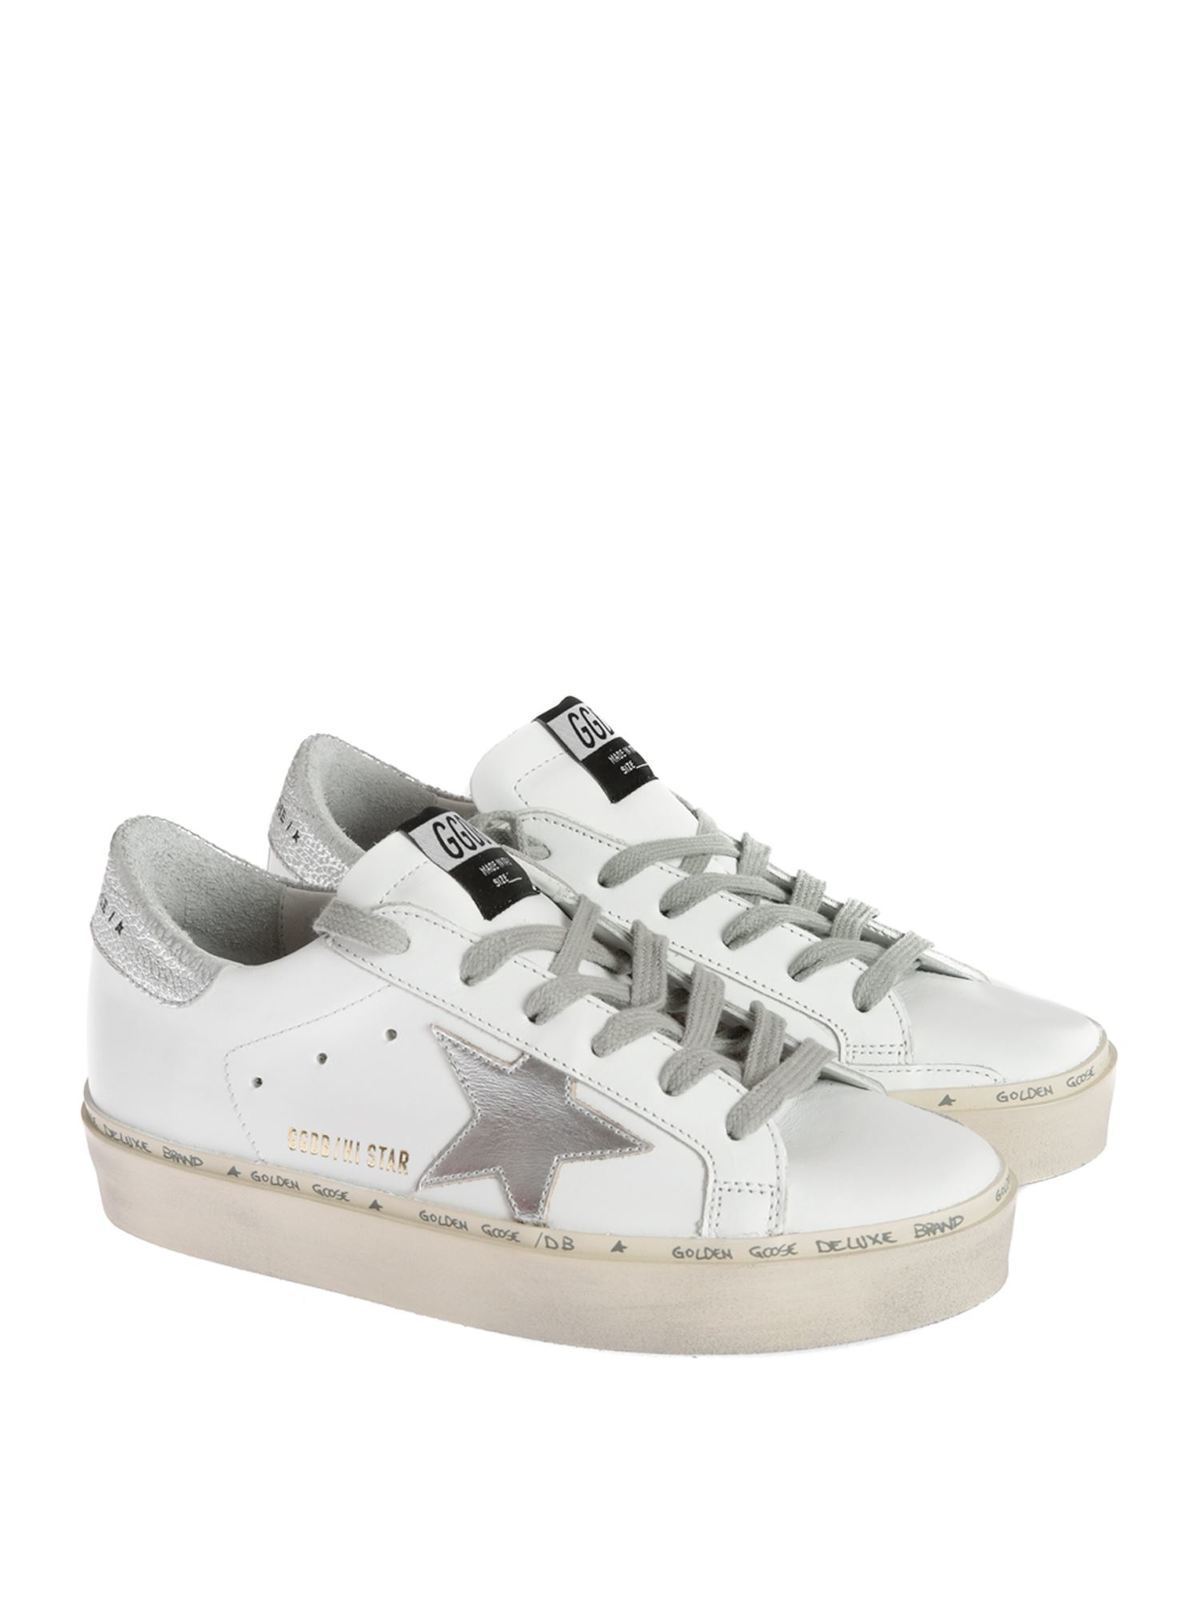 Shop Golden Goose Hi Star Sneakers In White And Silver Star In Blanco